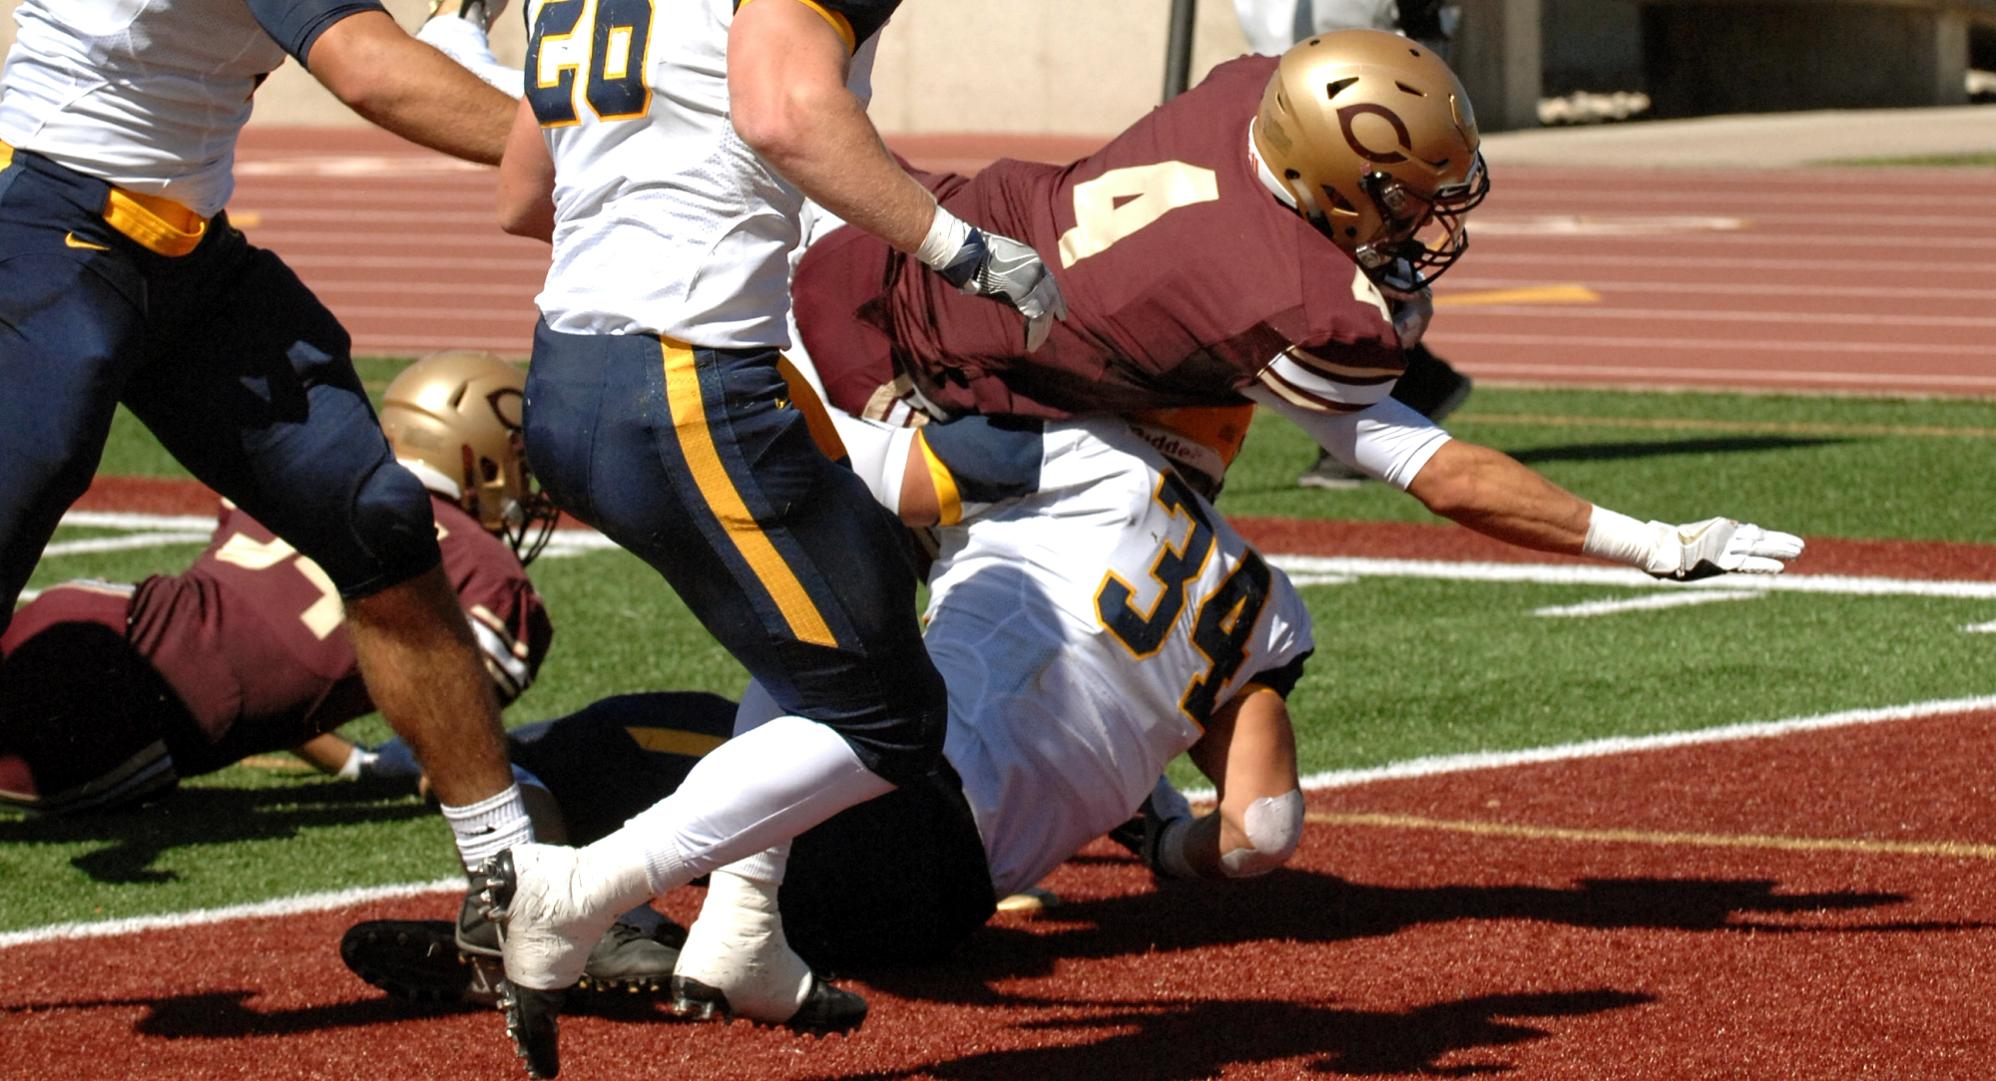 Junior running back Jason Montoyne runs over a Blugold defender on his way to a first-quarter touchdown in the Cobbers 25-7 win.